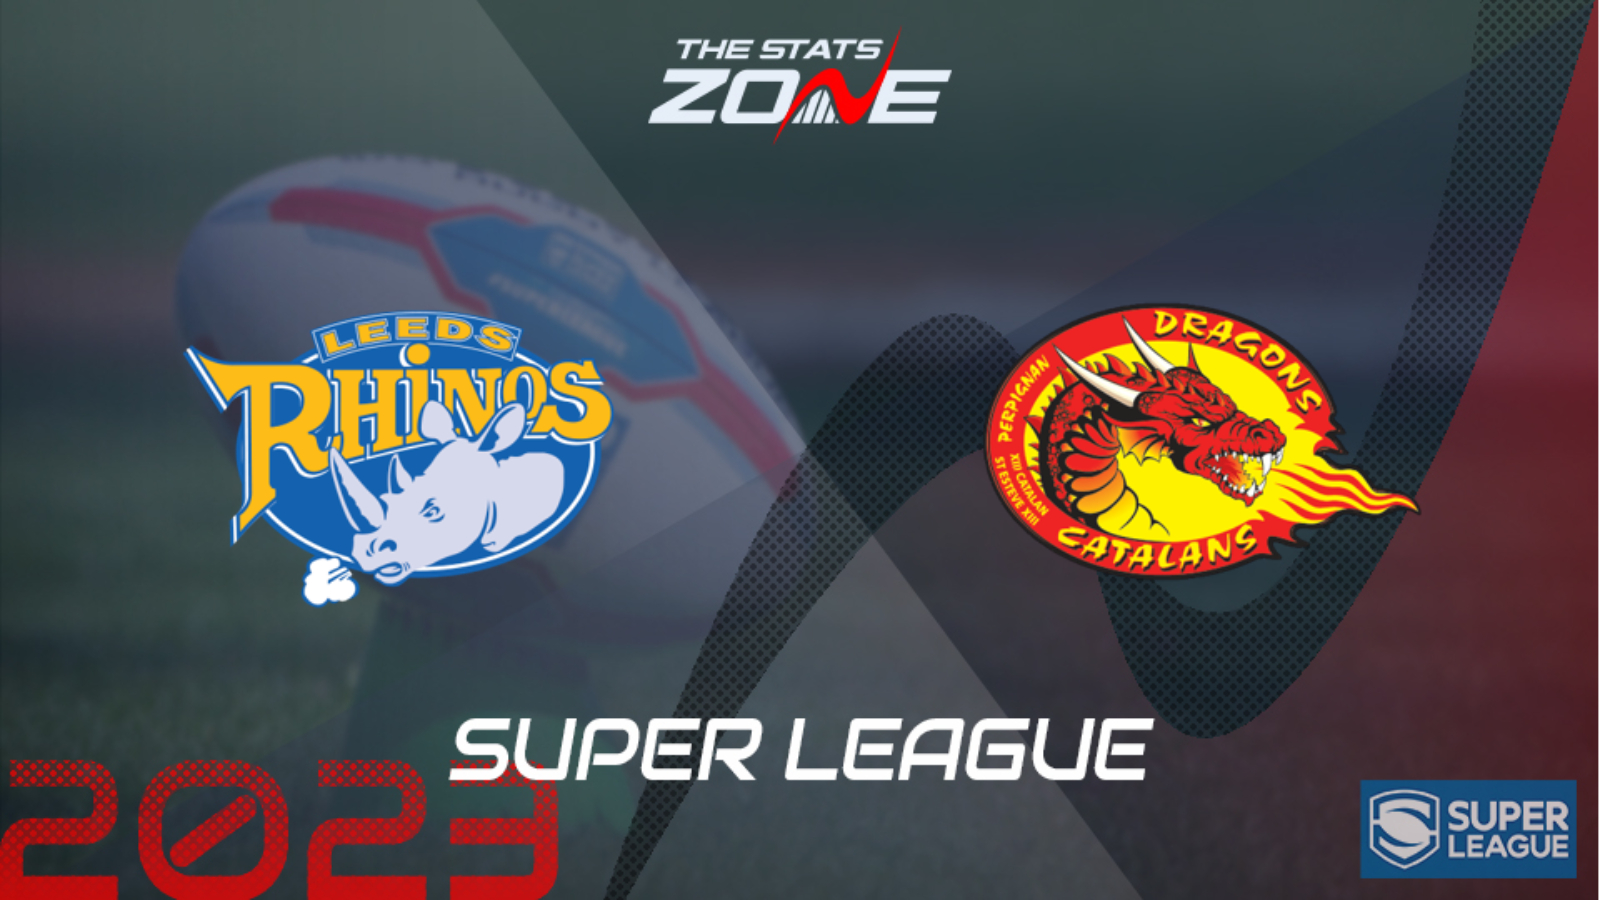 Leeds Rhinos vs Catalans Dragons – League Stage